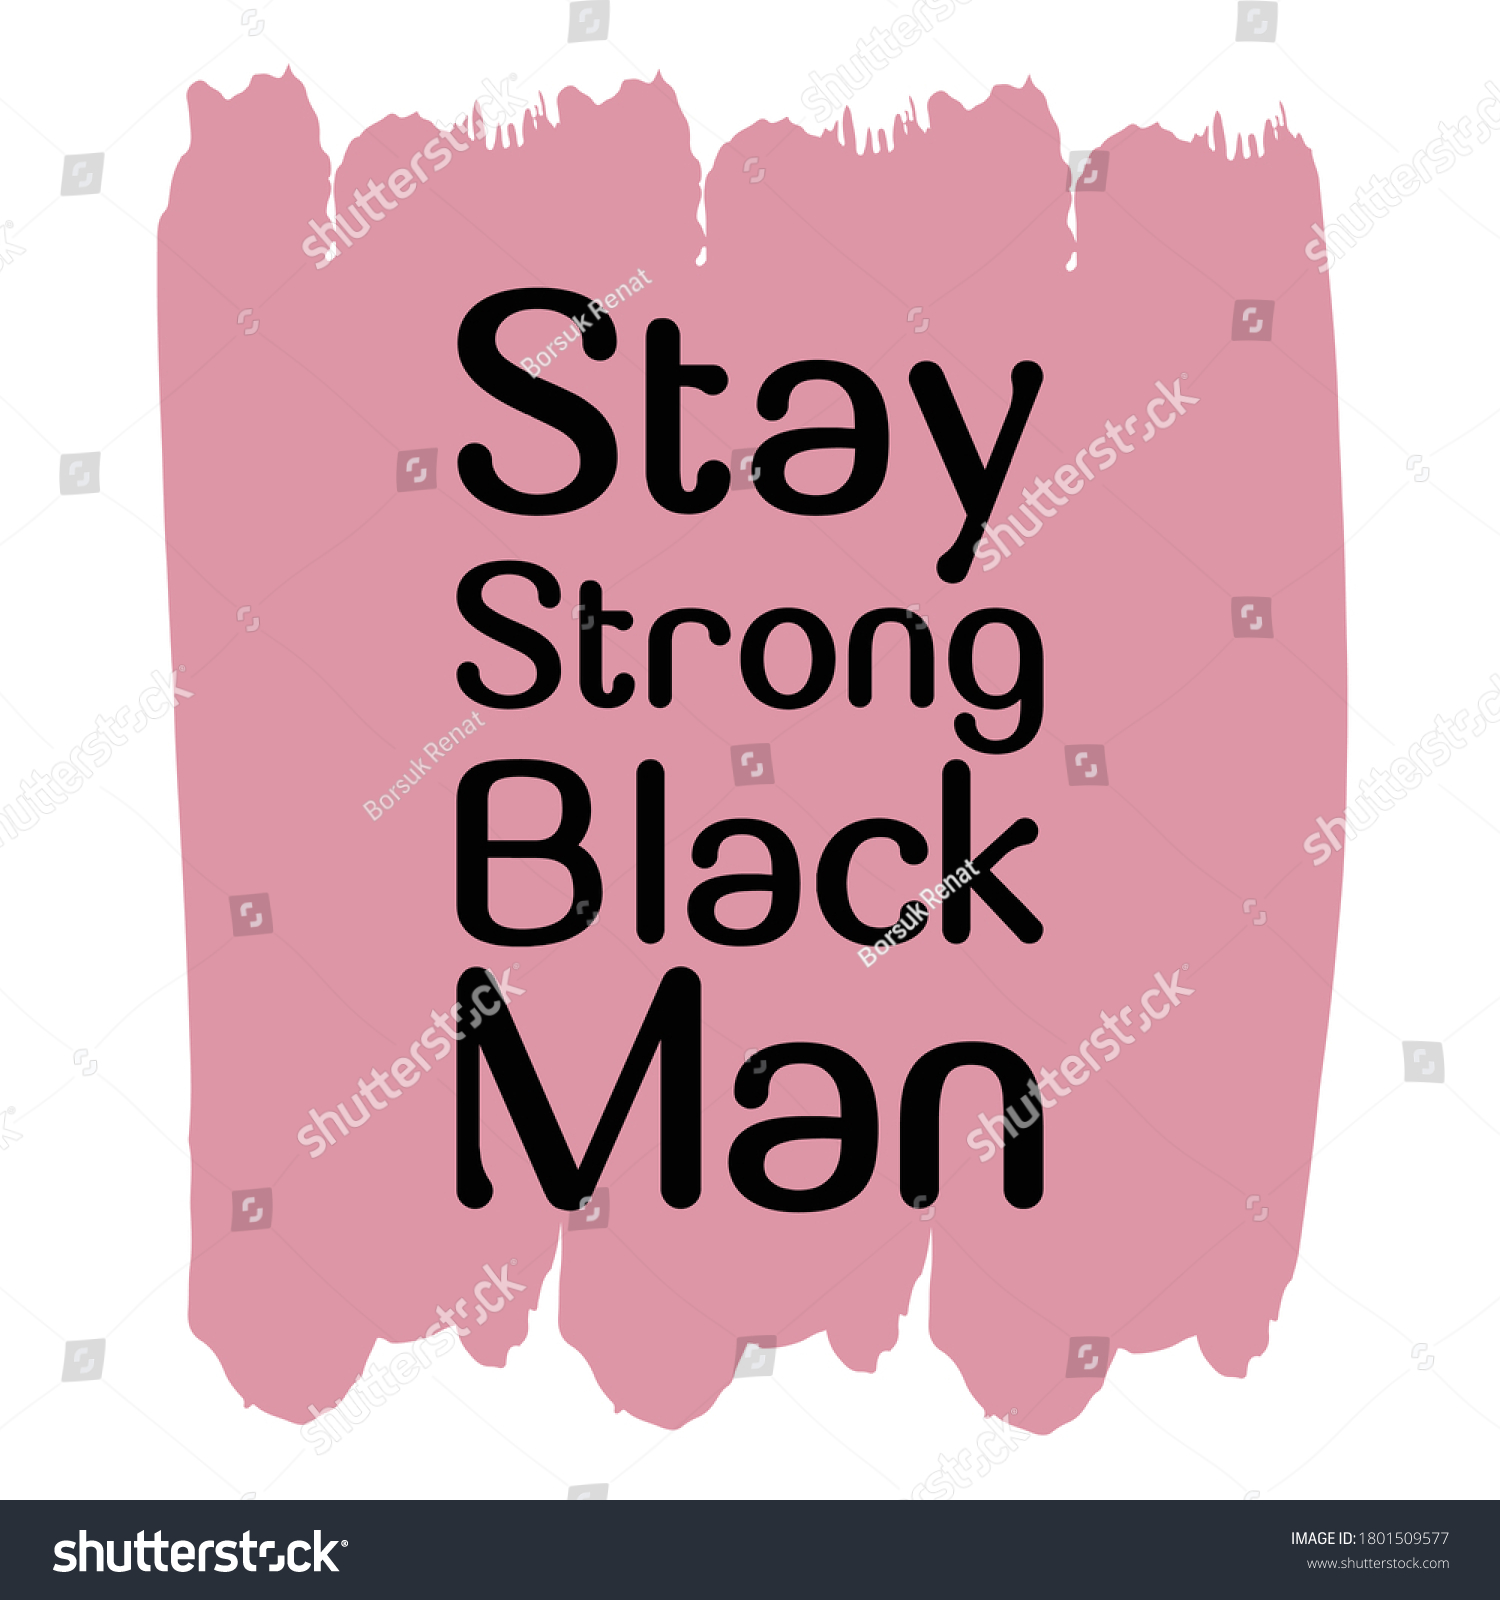 Strong black man quotes and sayings